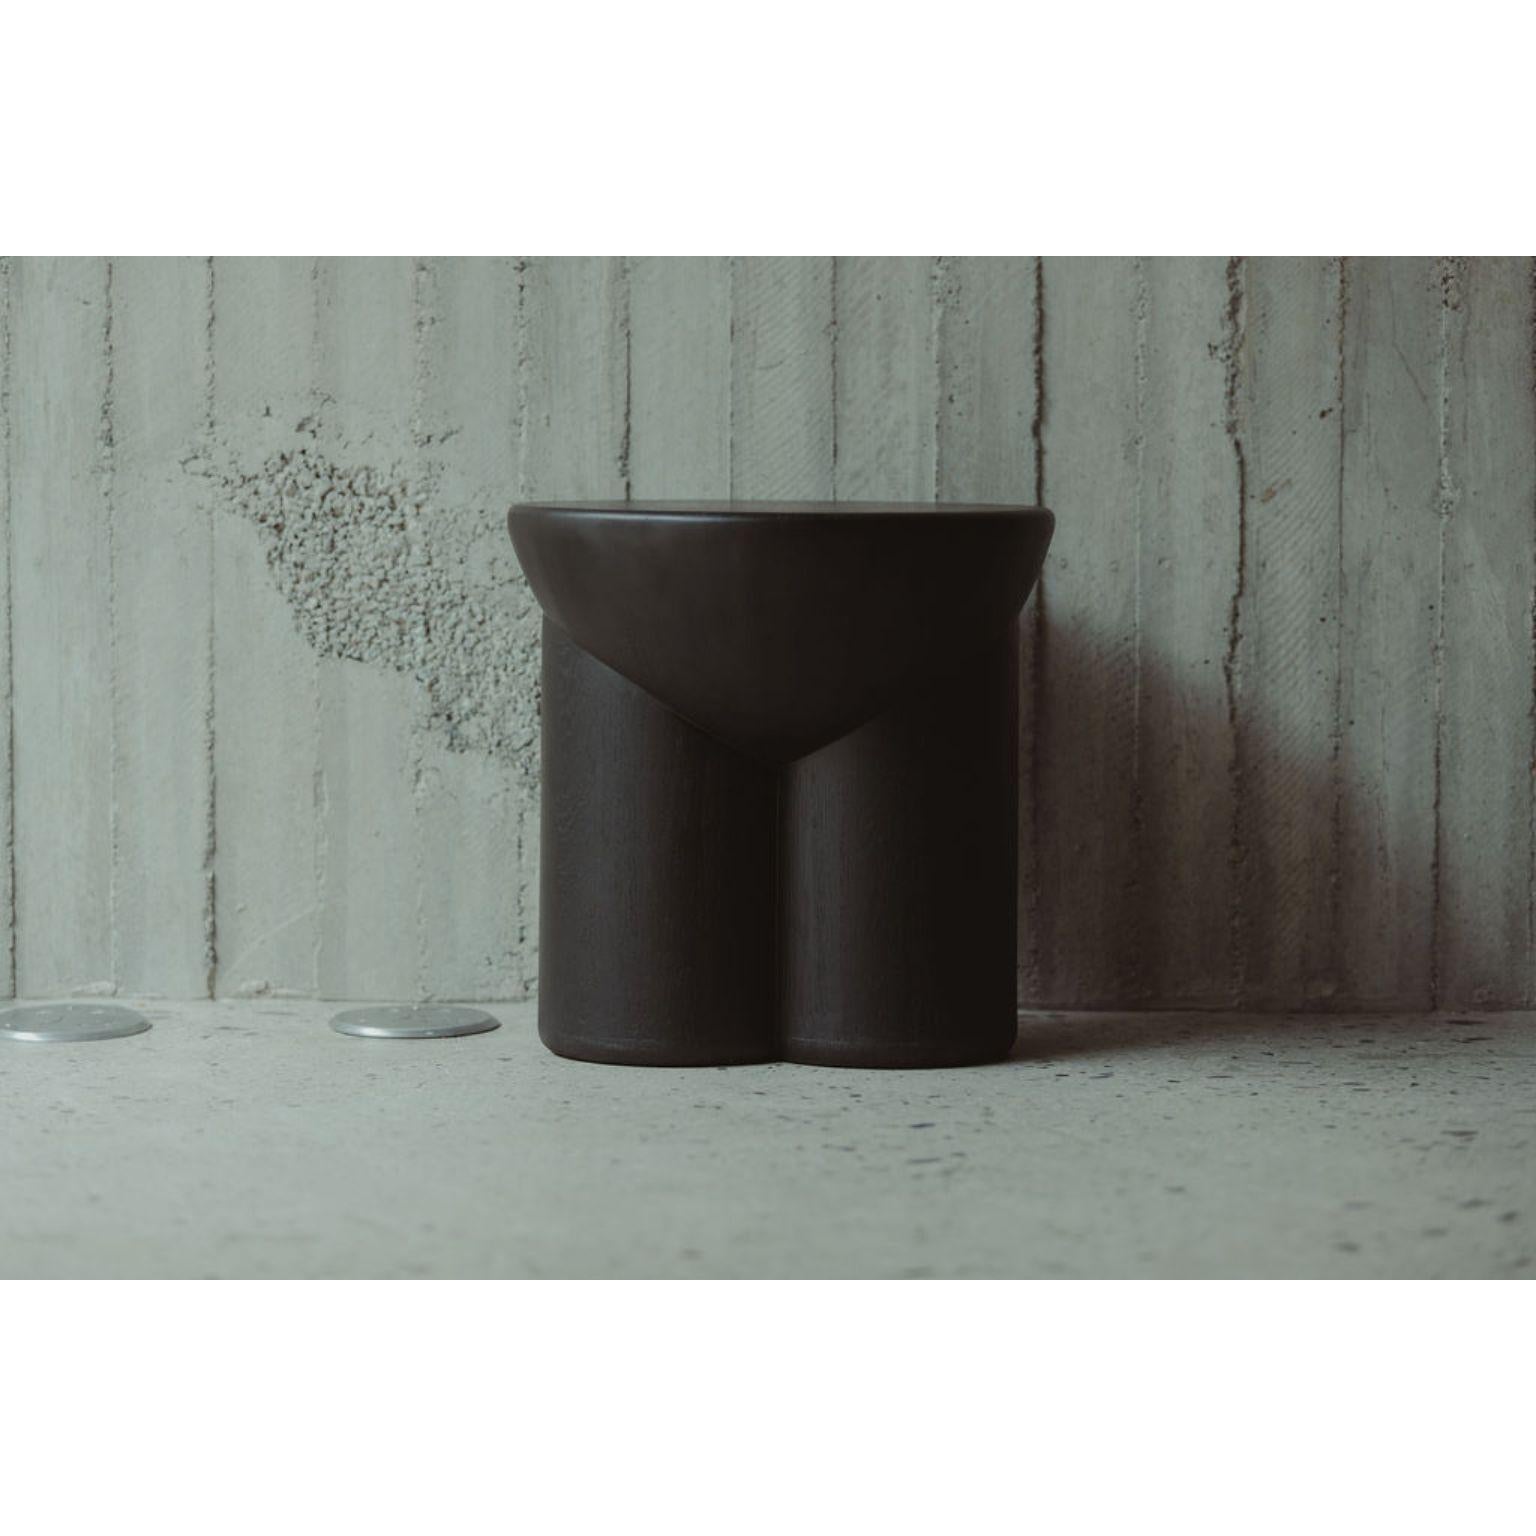 Matate Black Solid Oak Wood Stool by David Del Valle
Dimensions: D 40 x W 40 x H 40 cm.
Materials: Oak.

DAVID VALLE
We are a place, a space, a woven chair, the dreams of a craftsman, the pride of a worker, we are a way of thinking, we are moldable